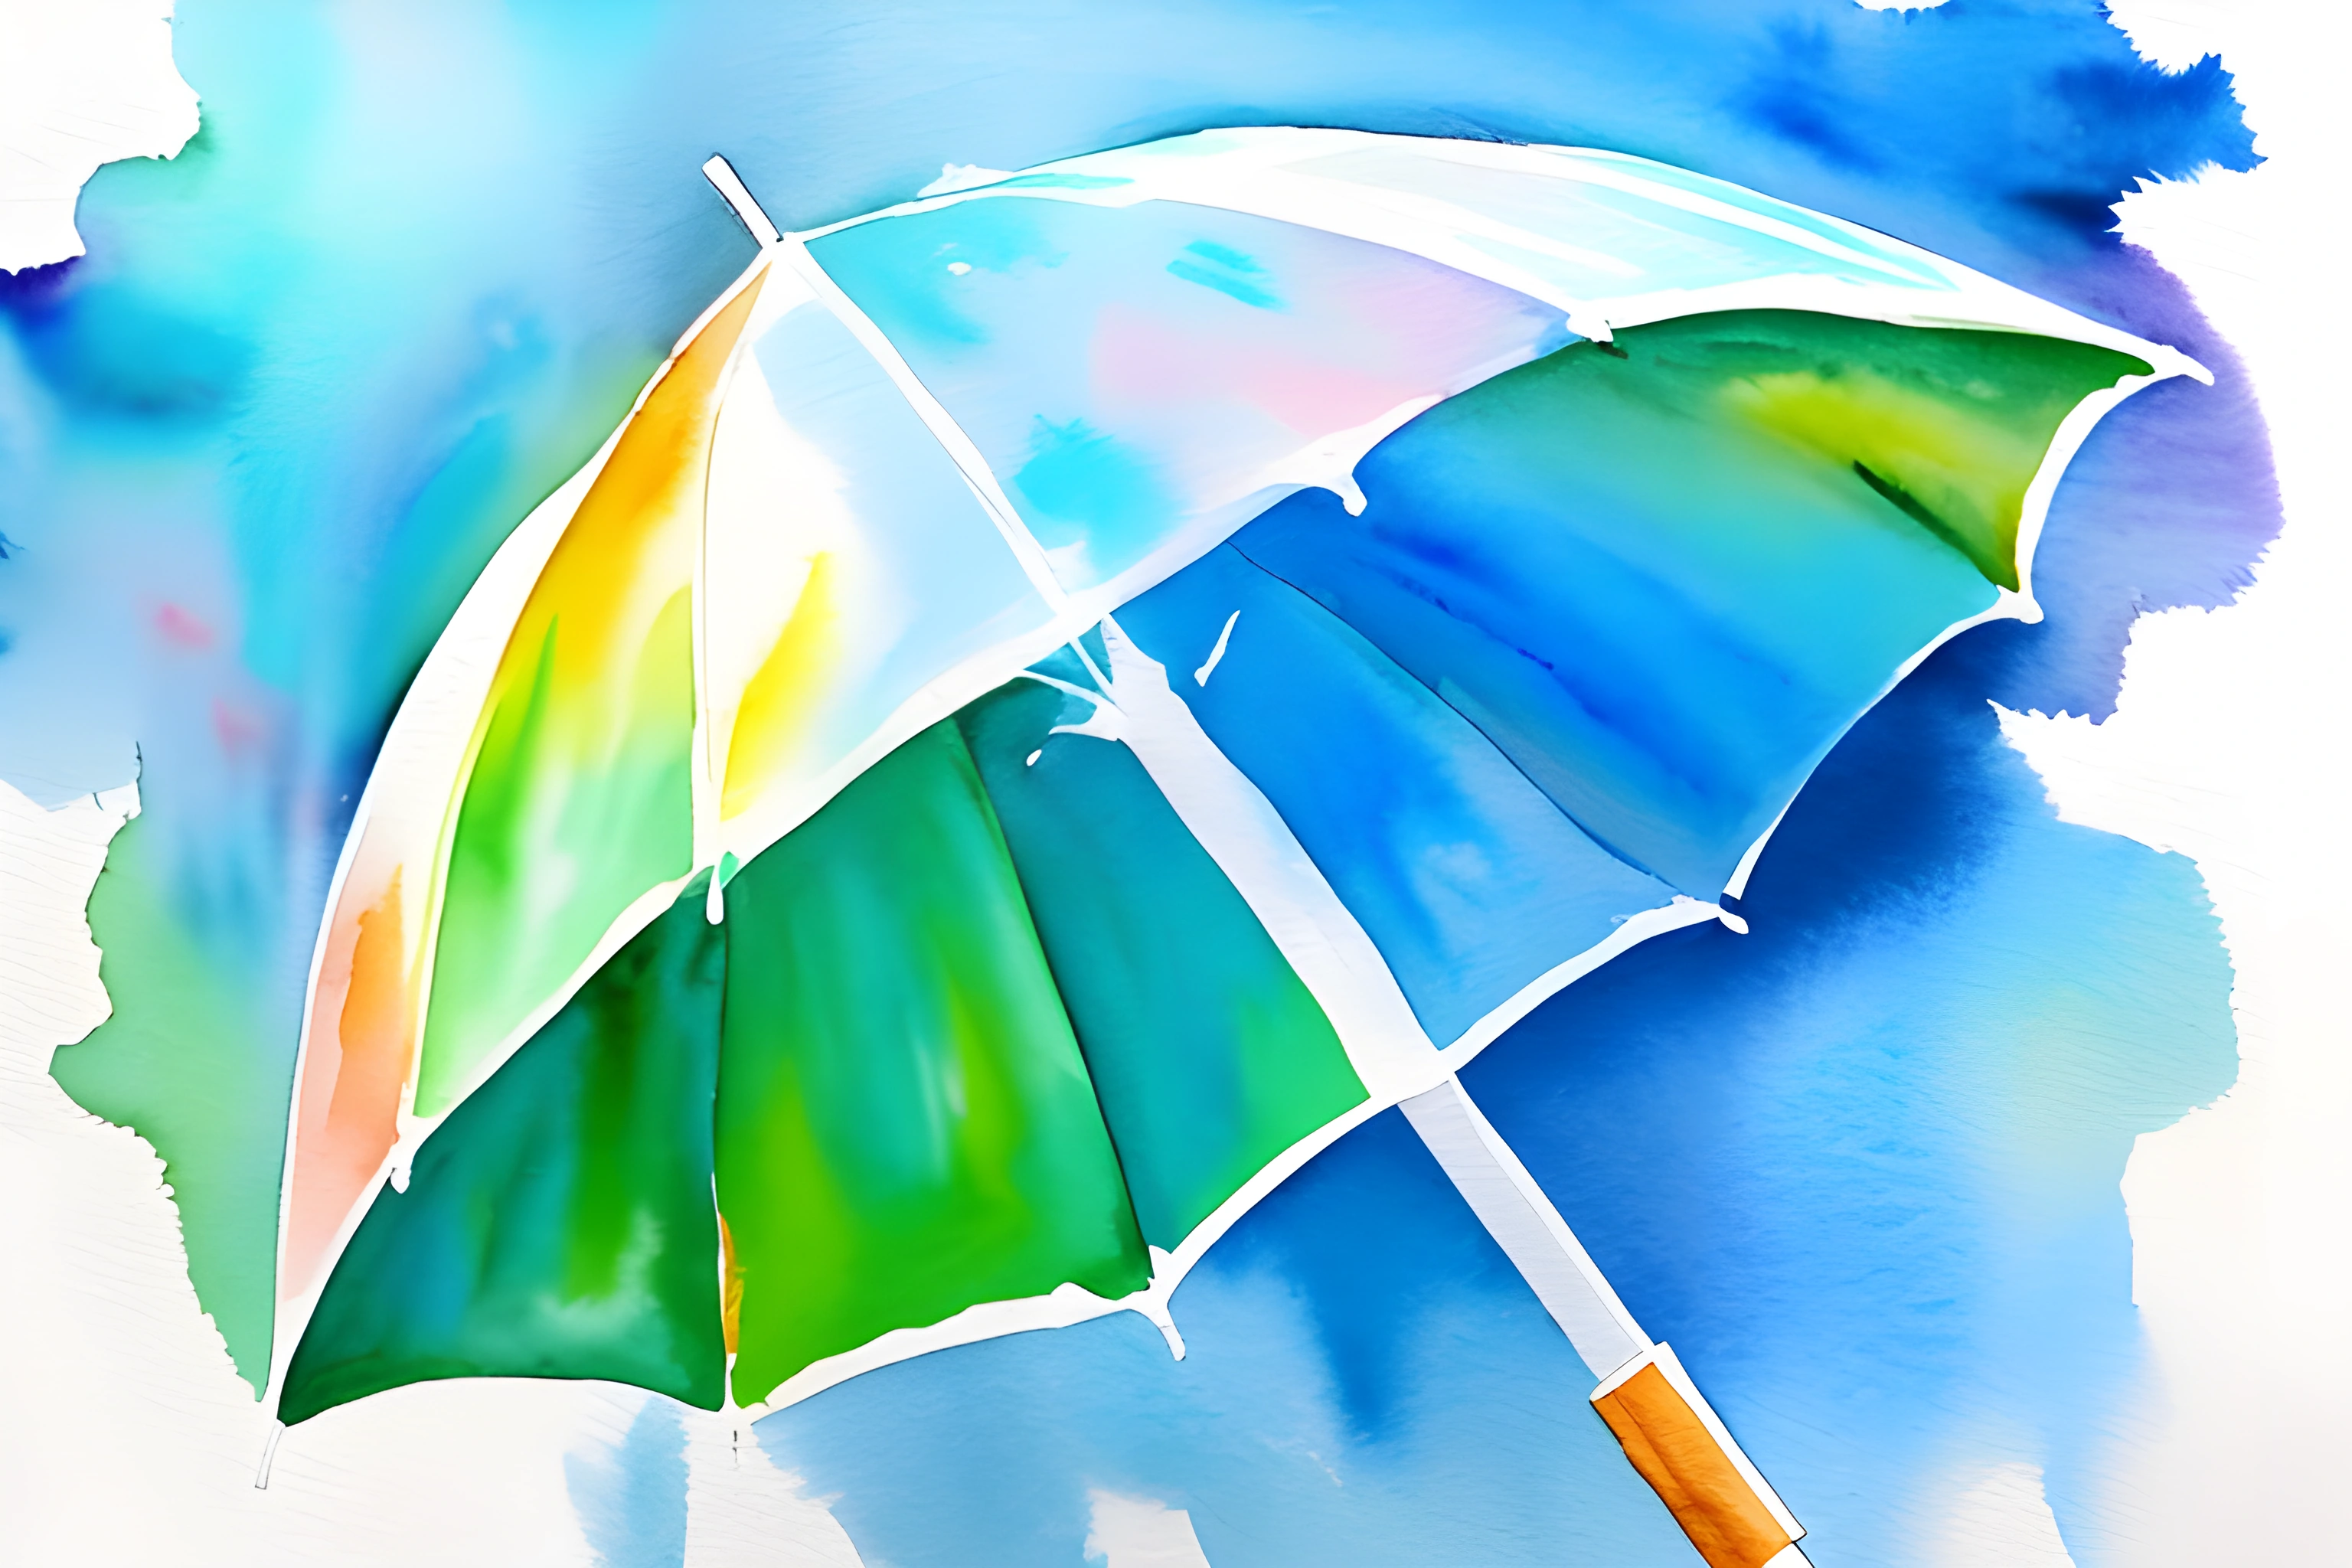 brightly colored umbrella with a wooden handle on a blue background